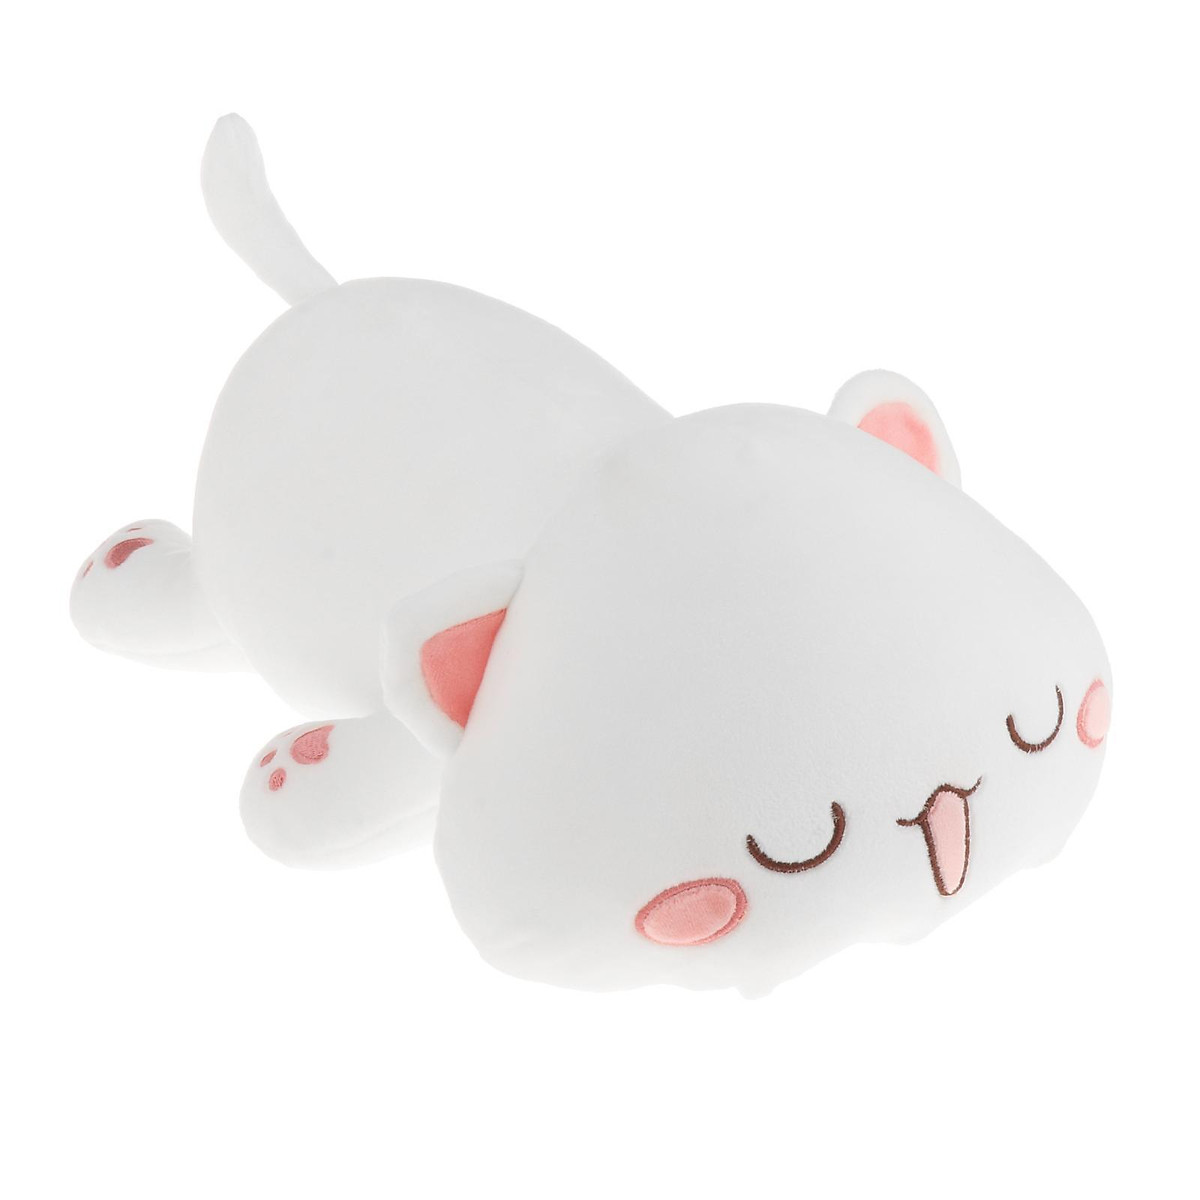 30cm Stuffed Cute Animal Plush Pillow Toy Gift for Kids White Cat ...